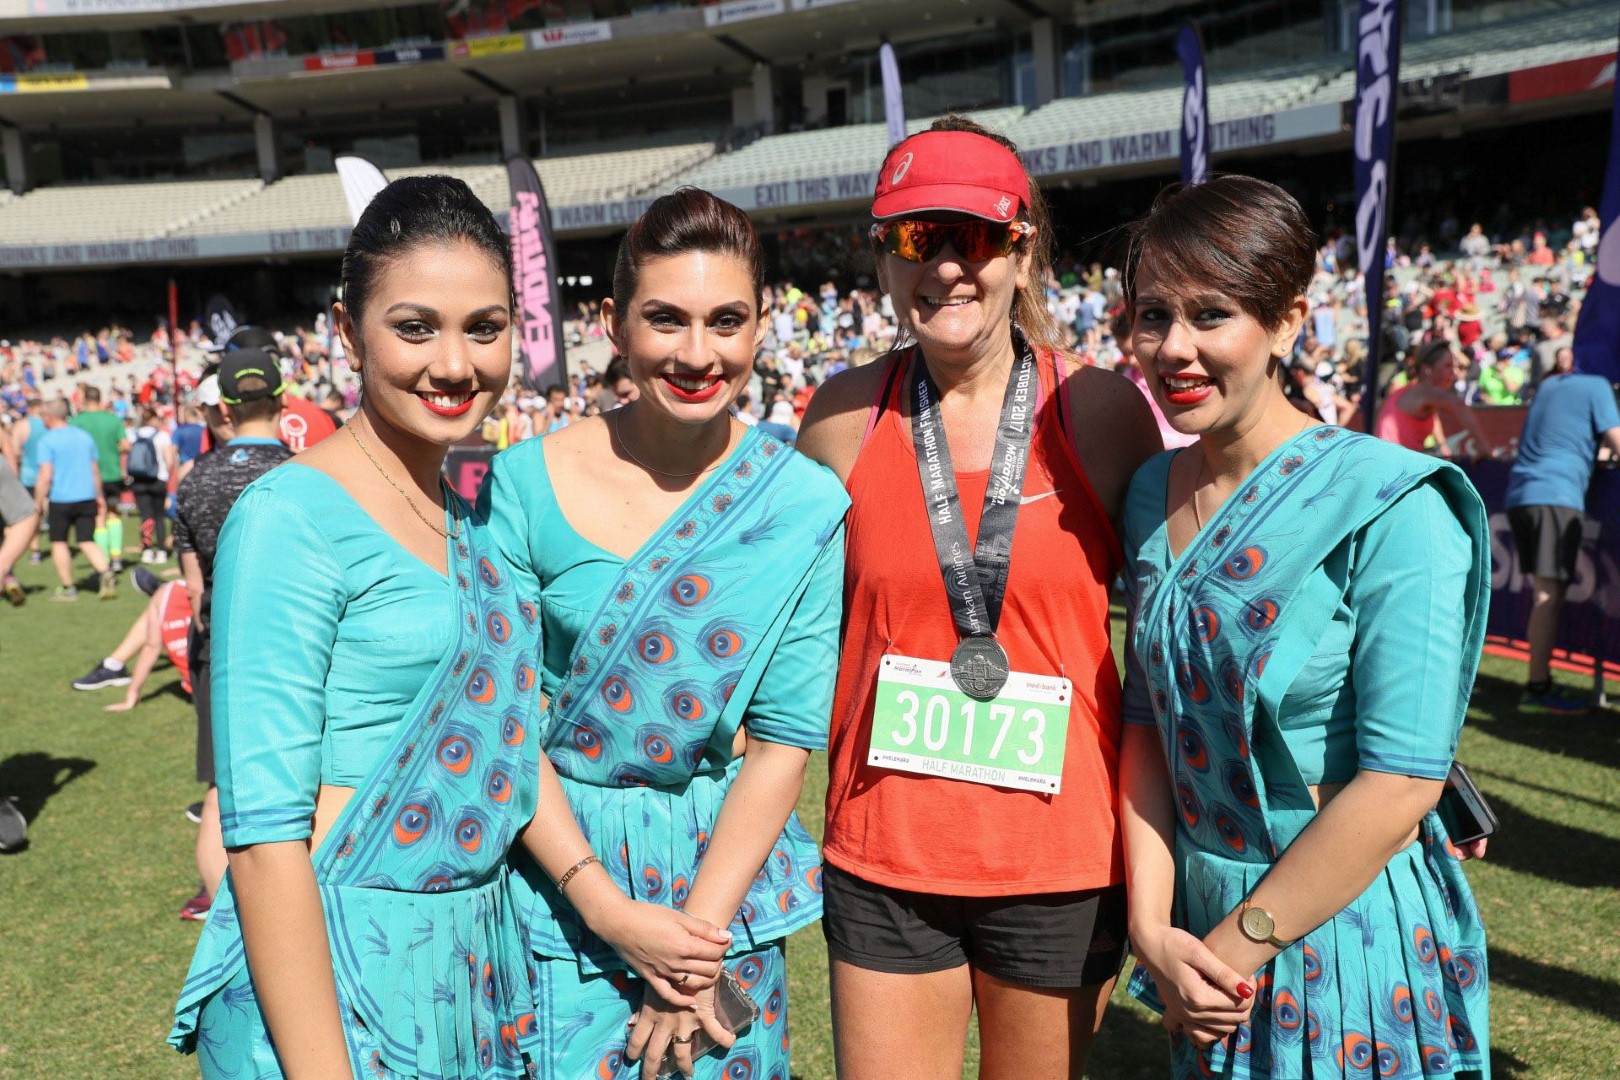 Margherita Traina pictured with SriLankan Airlines cabin crew members. She has competed in eleven marathons and nineteen half marathons around the world. Trainer is keen to run the Colombo Marathon and experience the Sri Lankan culture